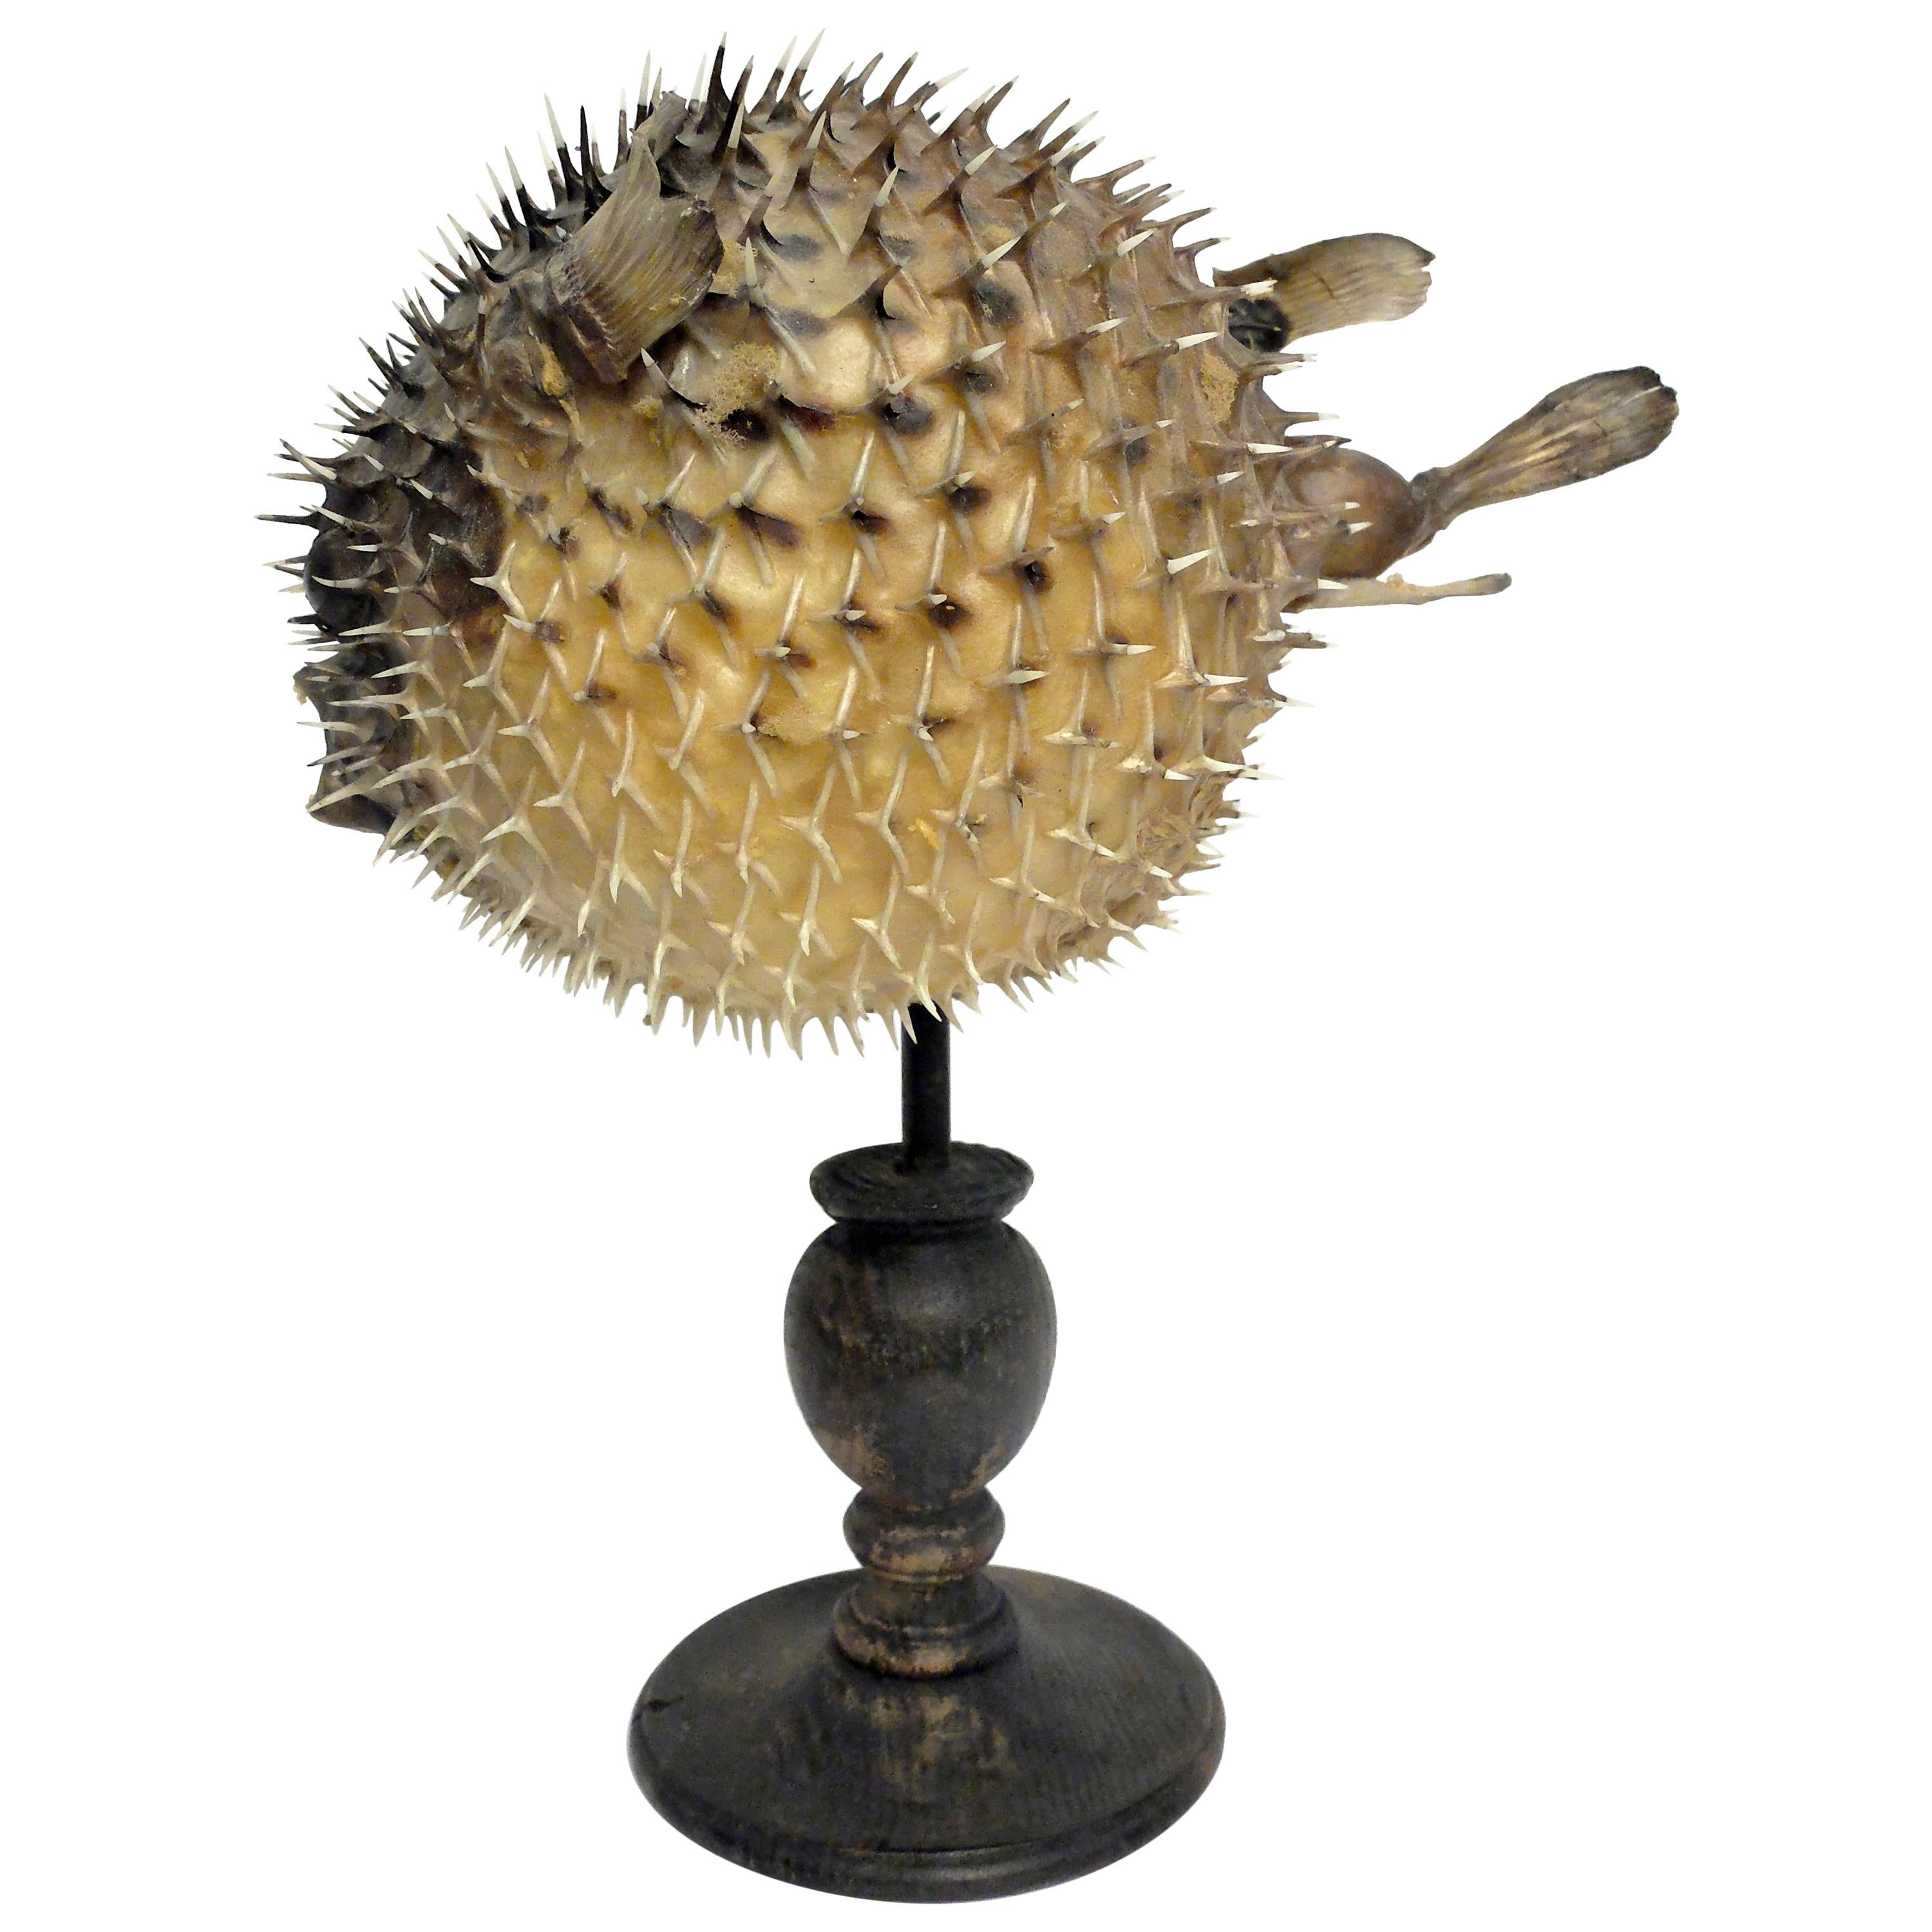 19th Century Wunderkammer Marine Natural Taxodermie Specimen of a Porcupine Fish